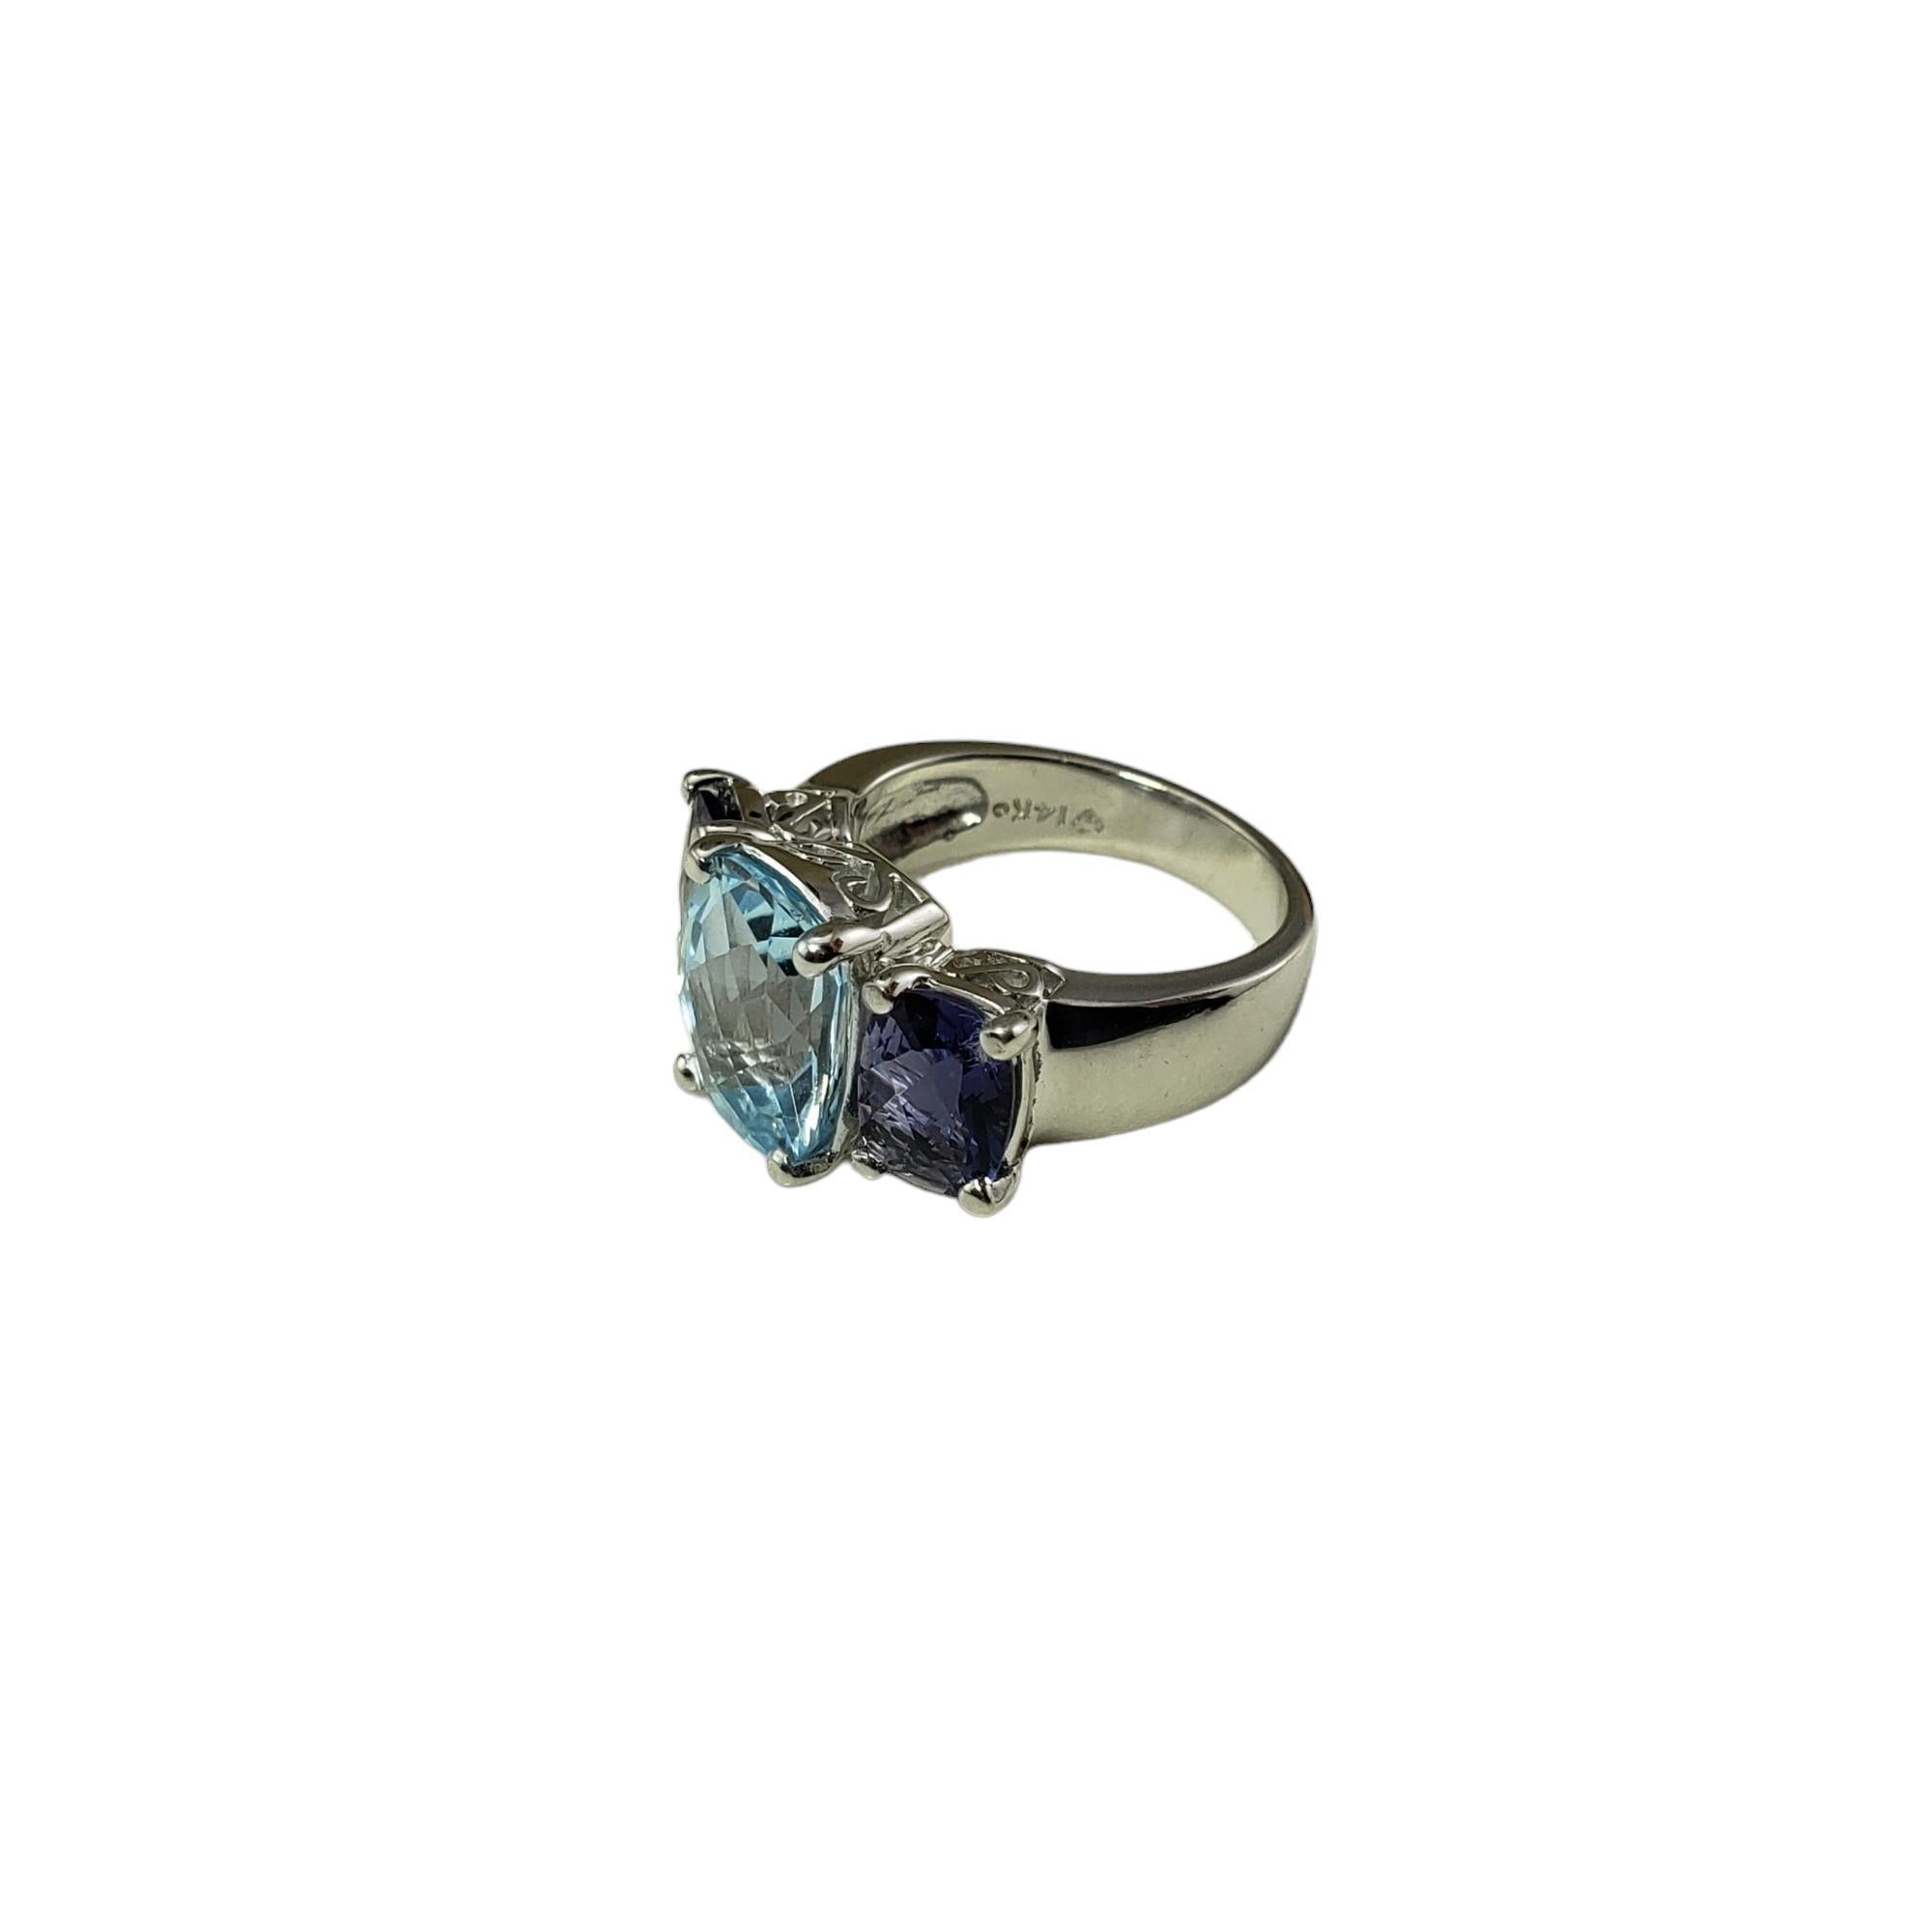 14K WG Aquamarine & Tanzanite Ring Size 6.5 #15763 In Good Condition For Sale In Washington Depot, CT